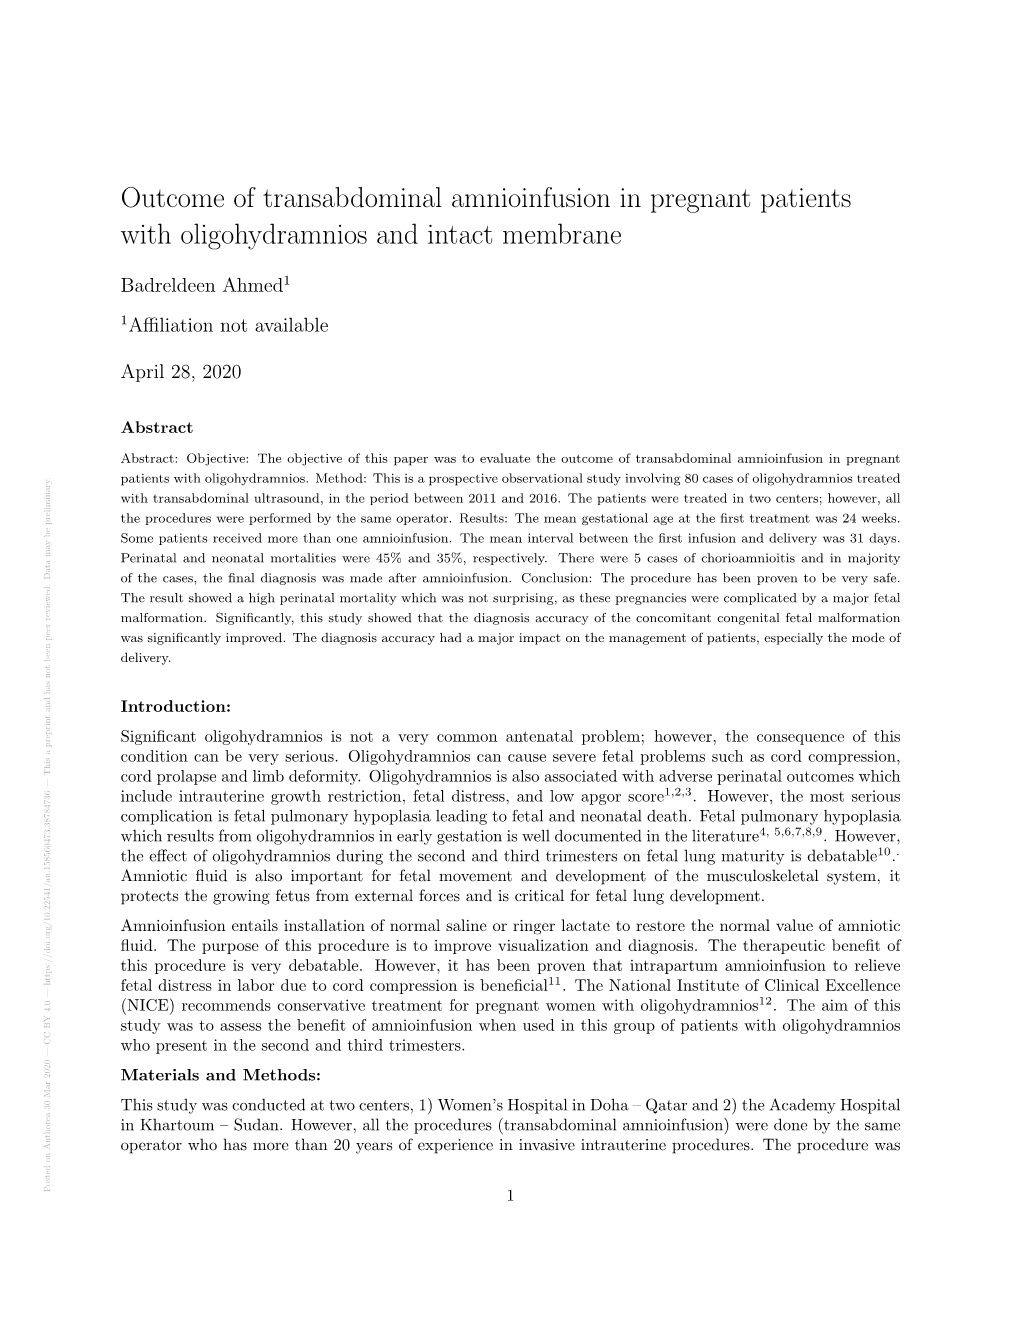 Outcome of Transabdominal Amnioinfusion in Pregnant Patients